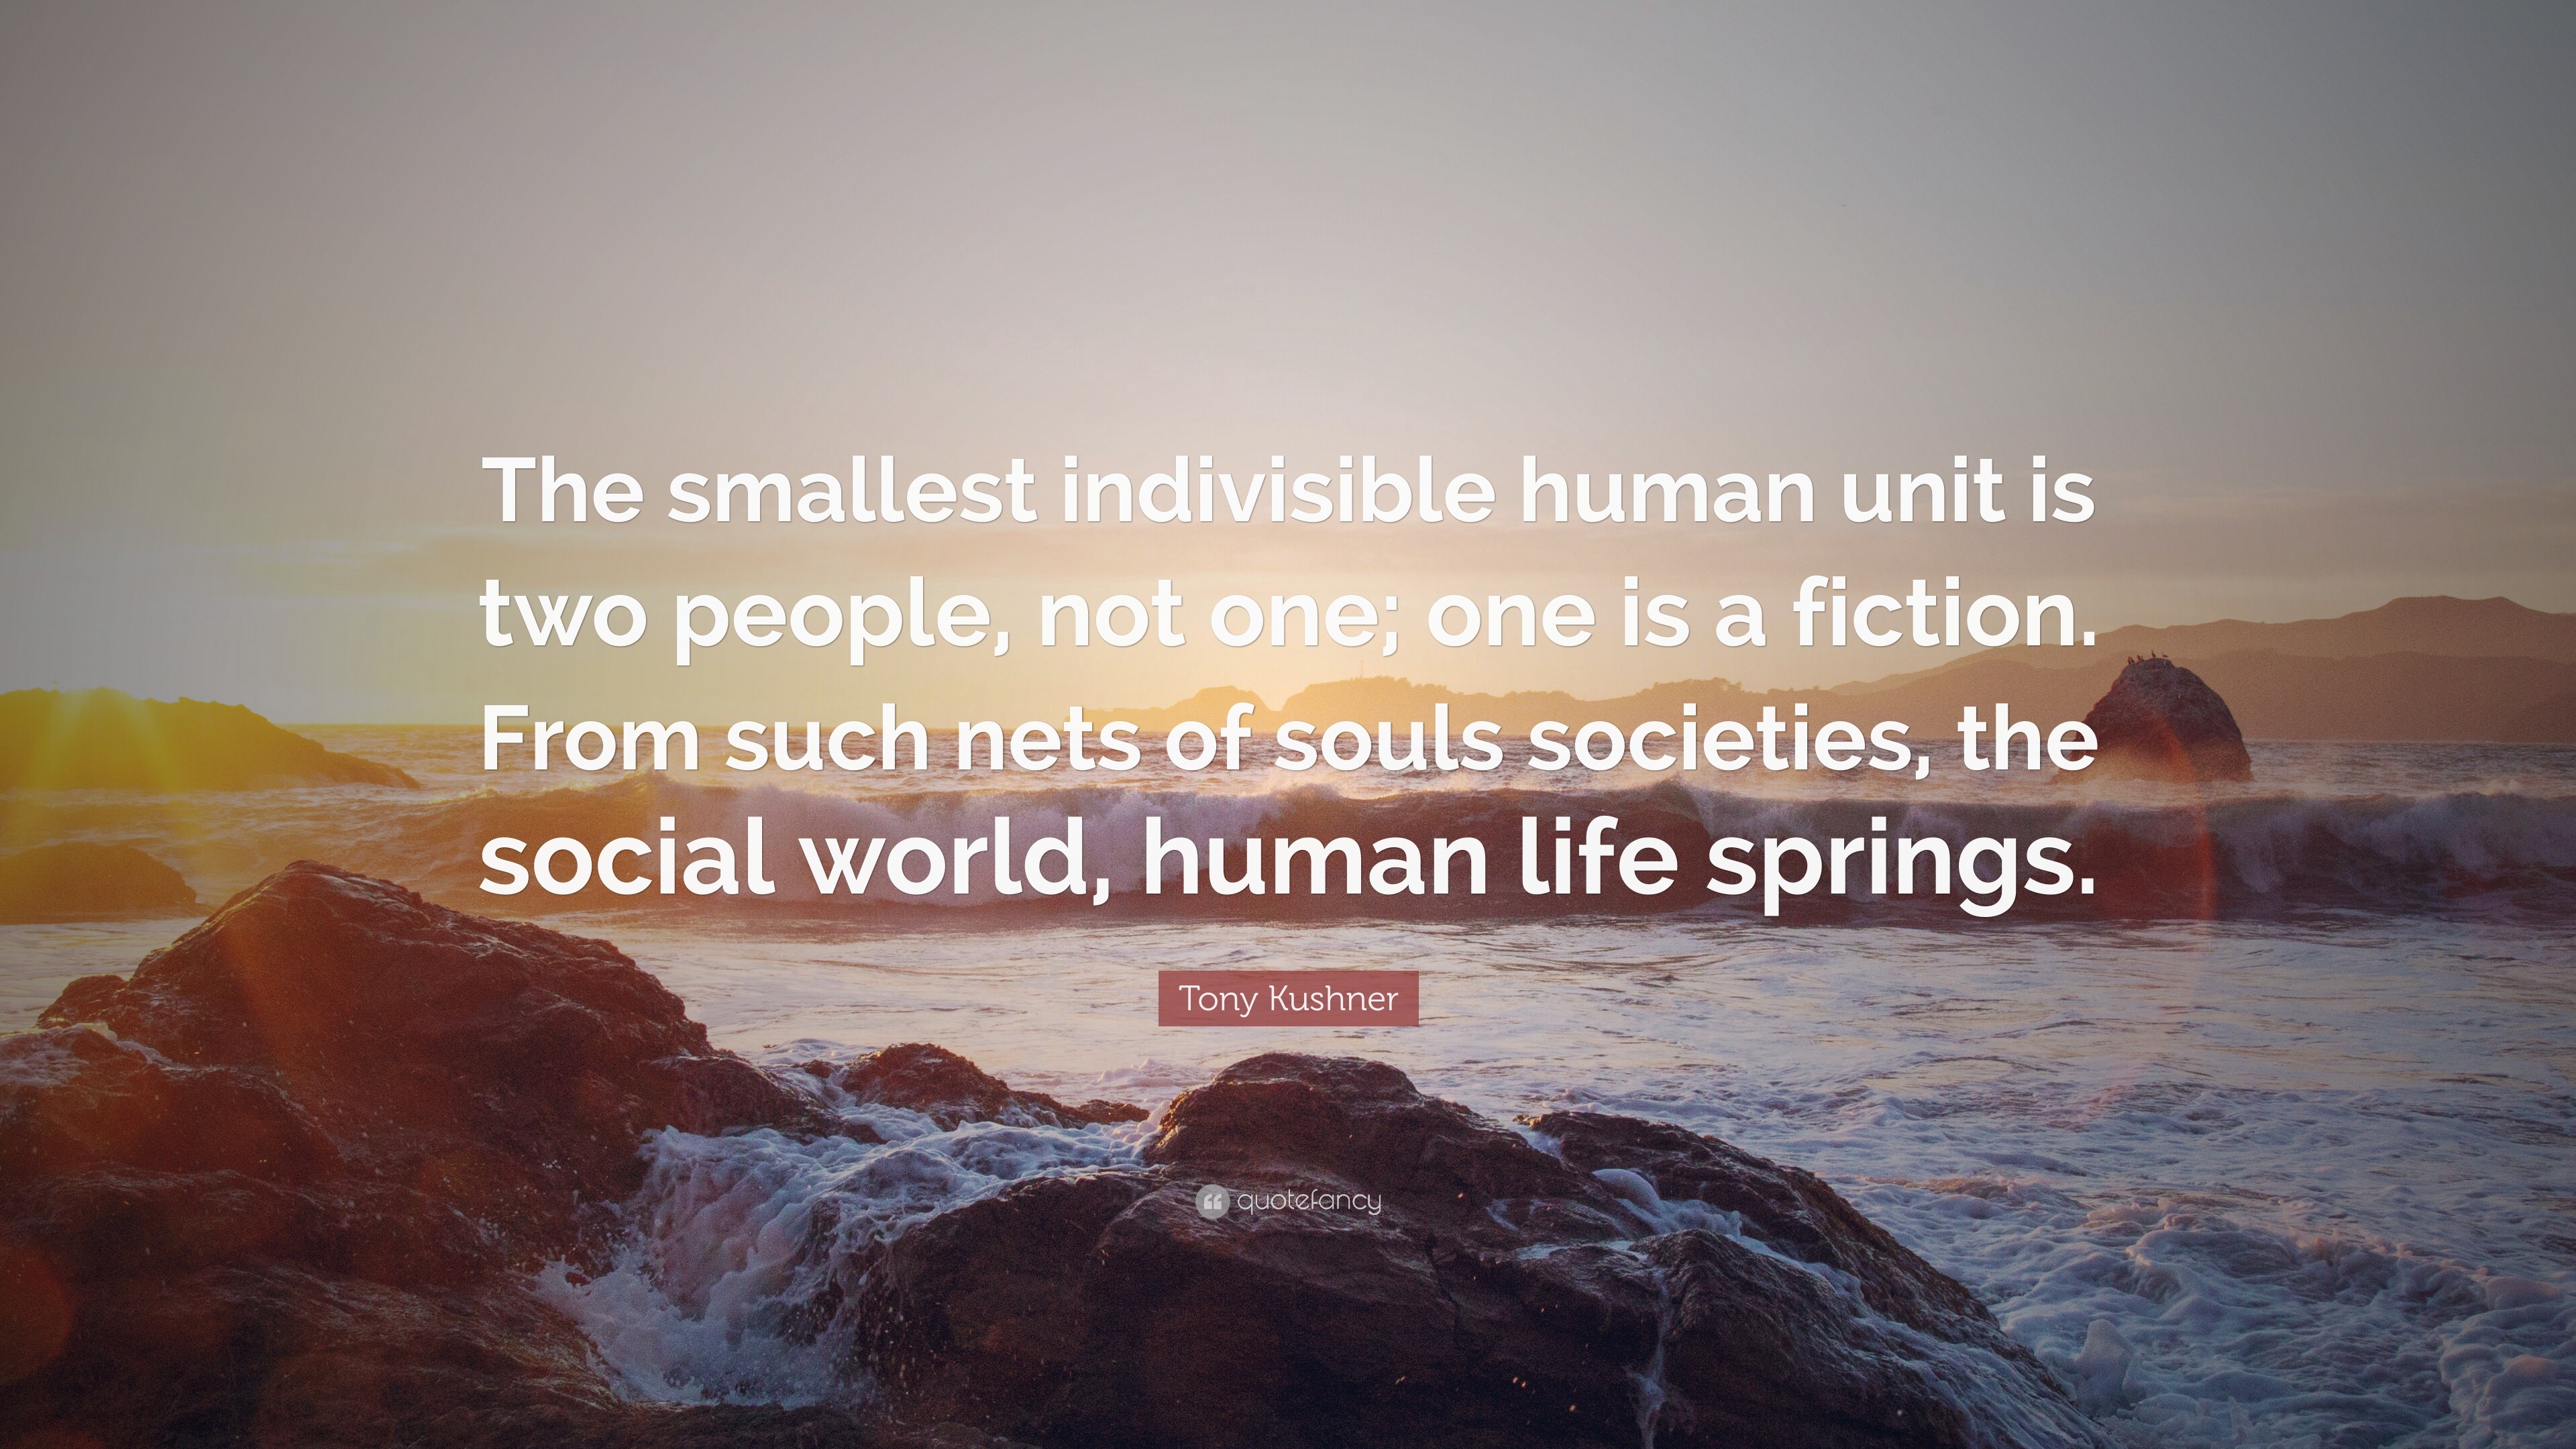 Tony Kushner Quote The Smallest Indivisible Human Unit Is - 